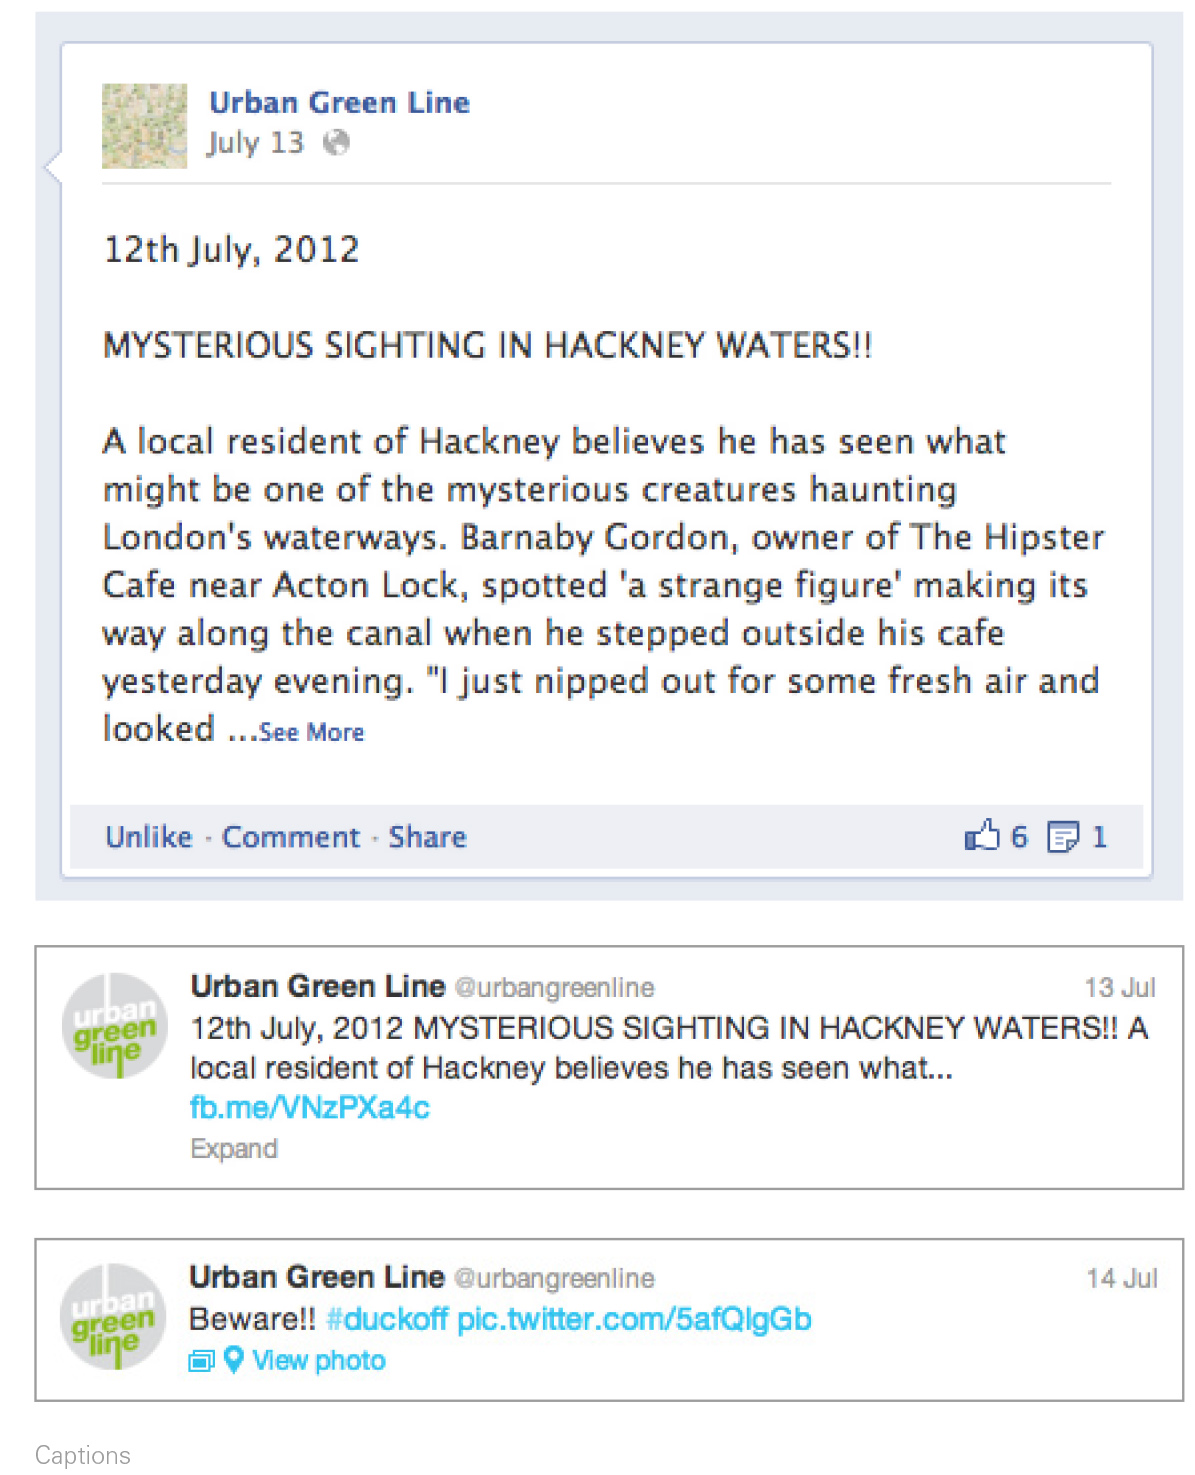 Urban myths about mysterious creatures sighted in the Hackney canal are spread on twitter